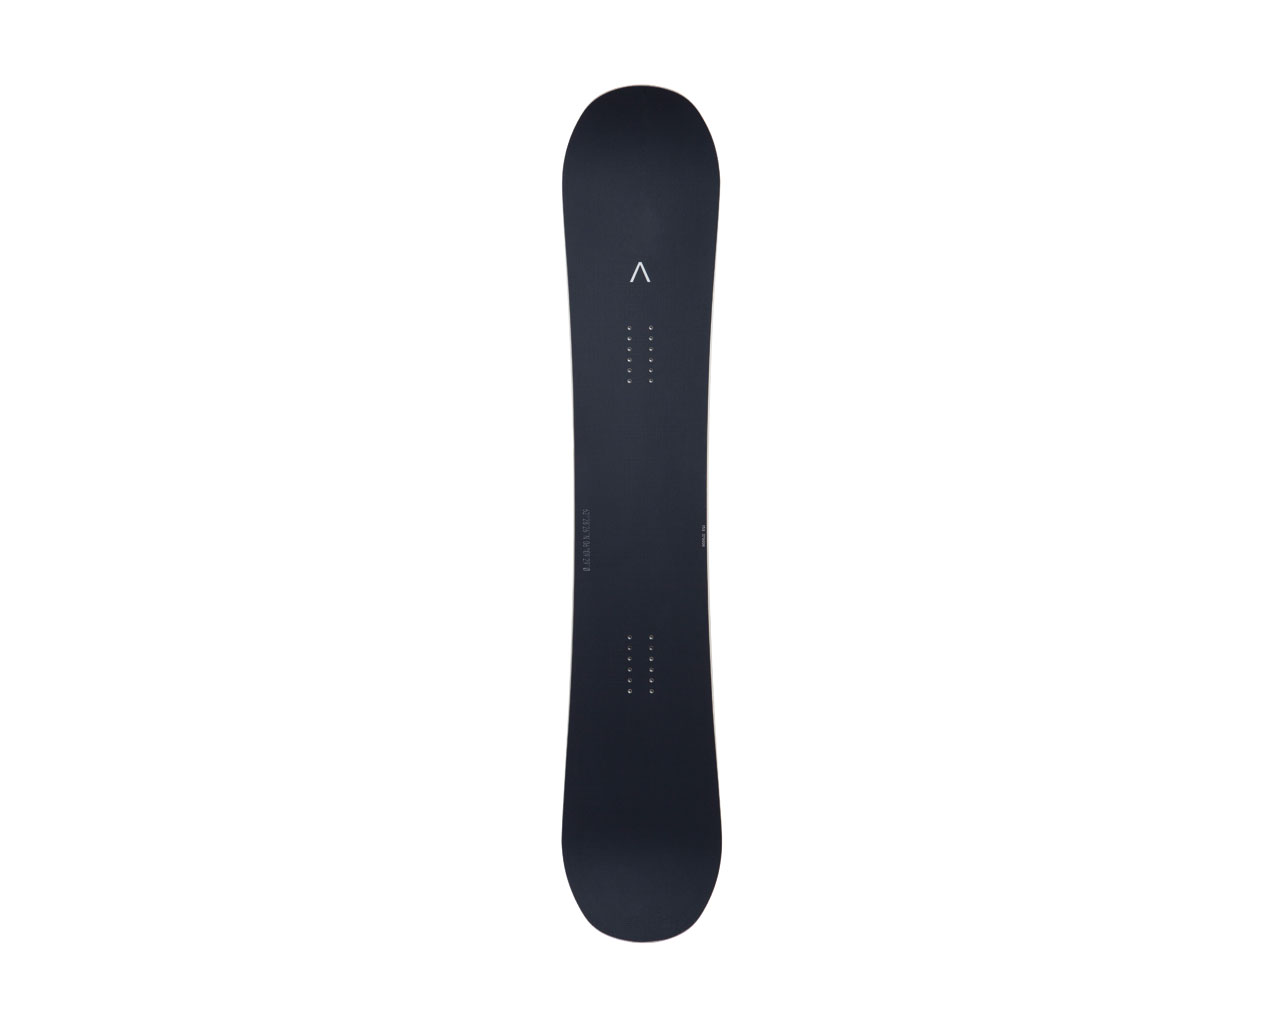 Fjell FW20/21 Snowboard Preview